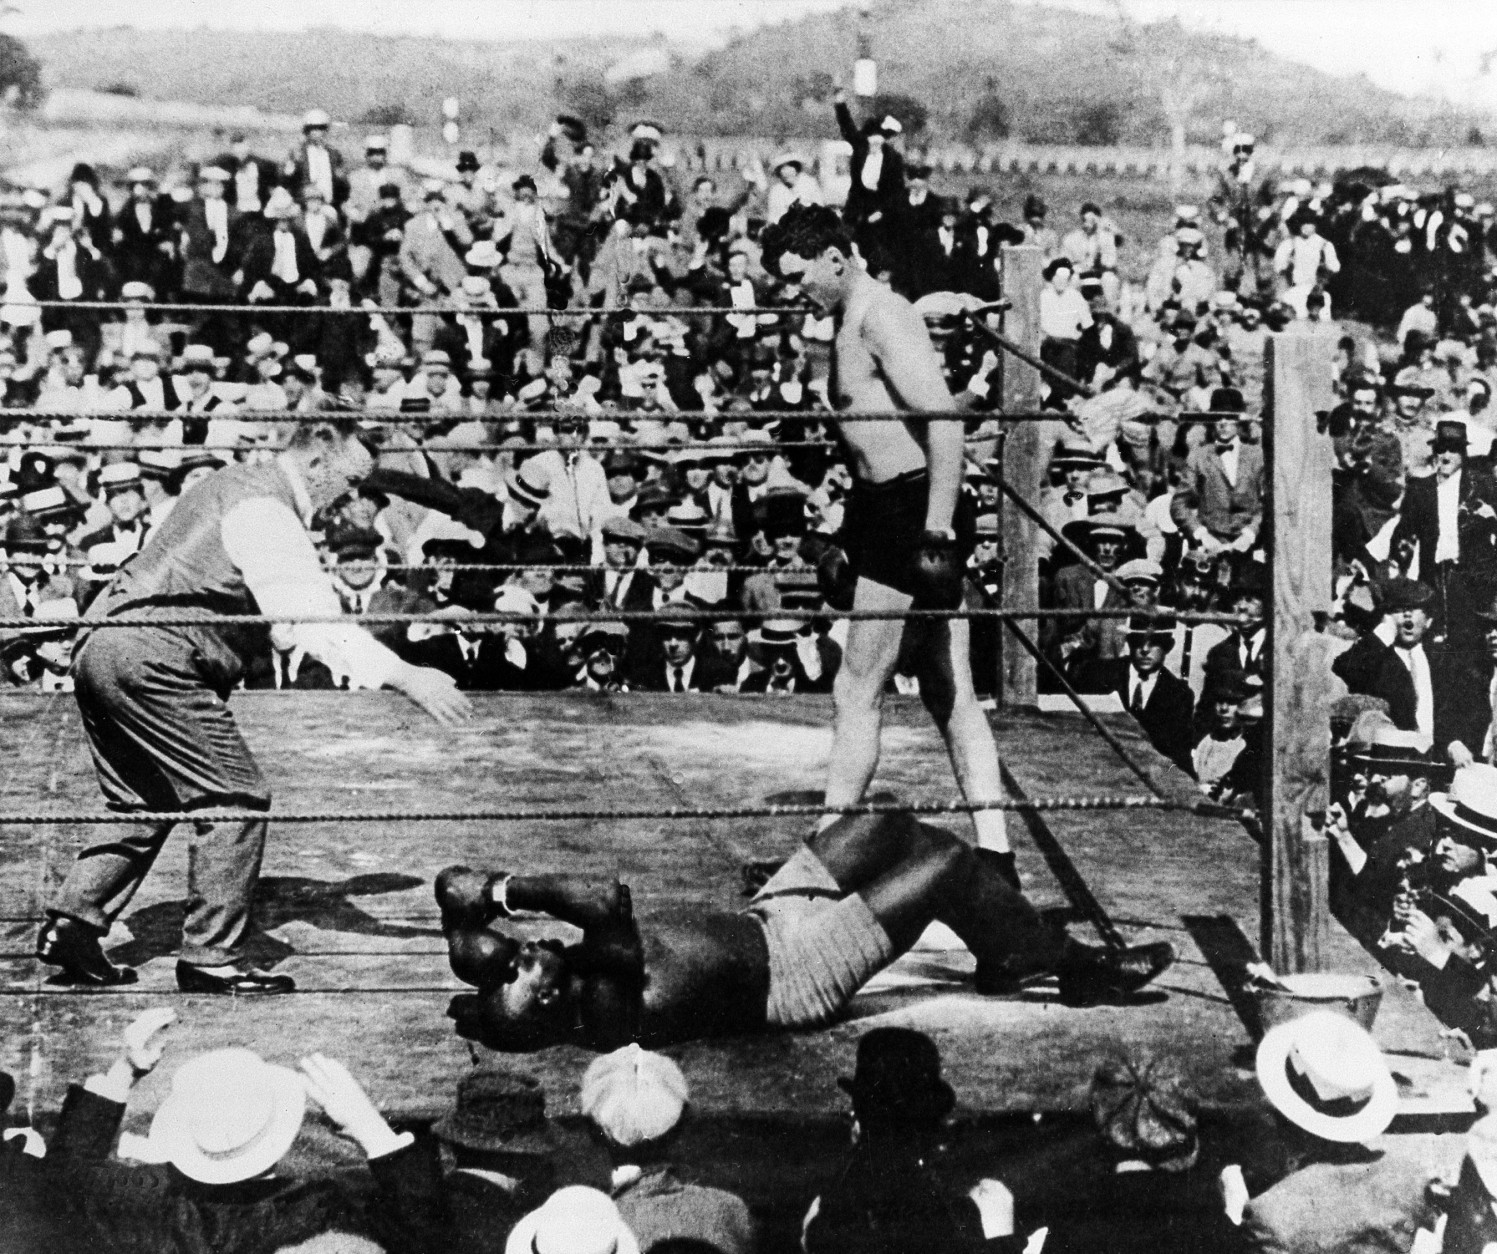 Heavyweight championship bout between Jess Willard and Jack Johnson, April 5, 1915, at Havana Cuba. Willard knocked out Johnson in the 26th round (old count) to win bout and title from Johnson. (AP Photo)